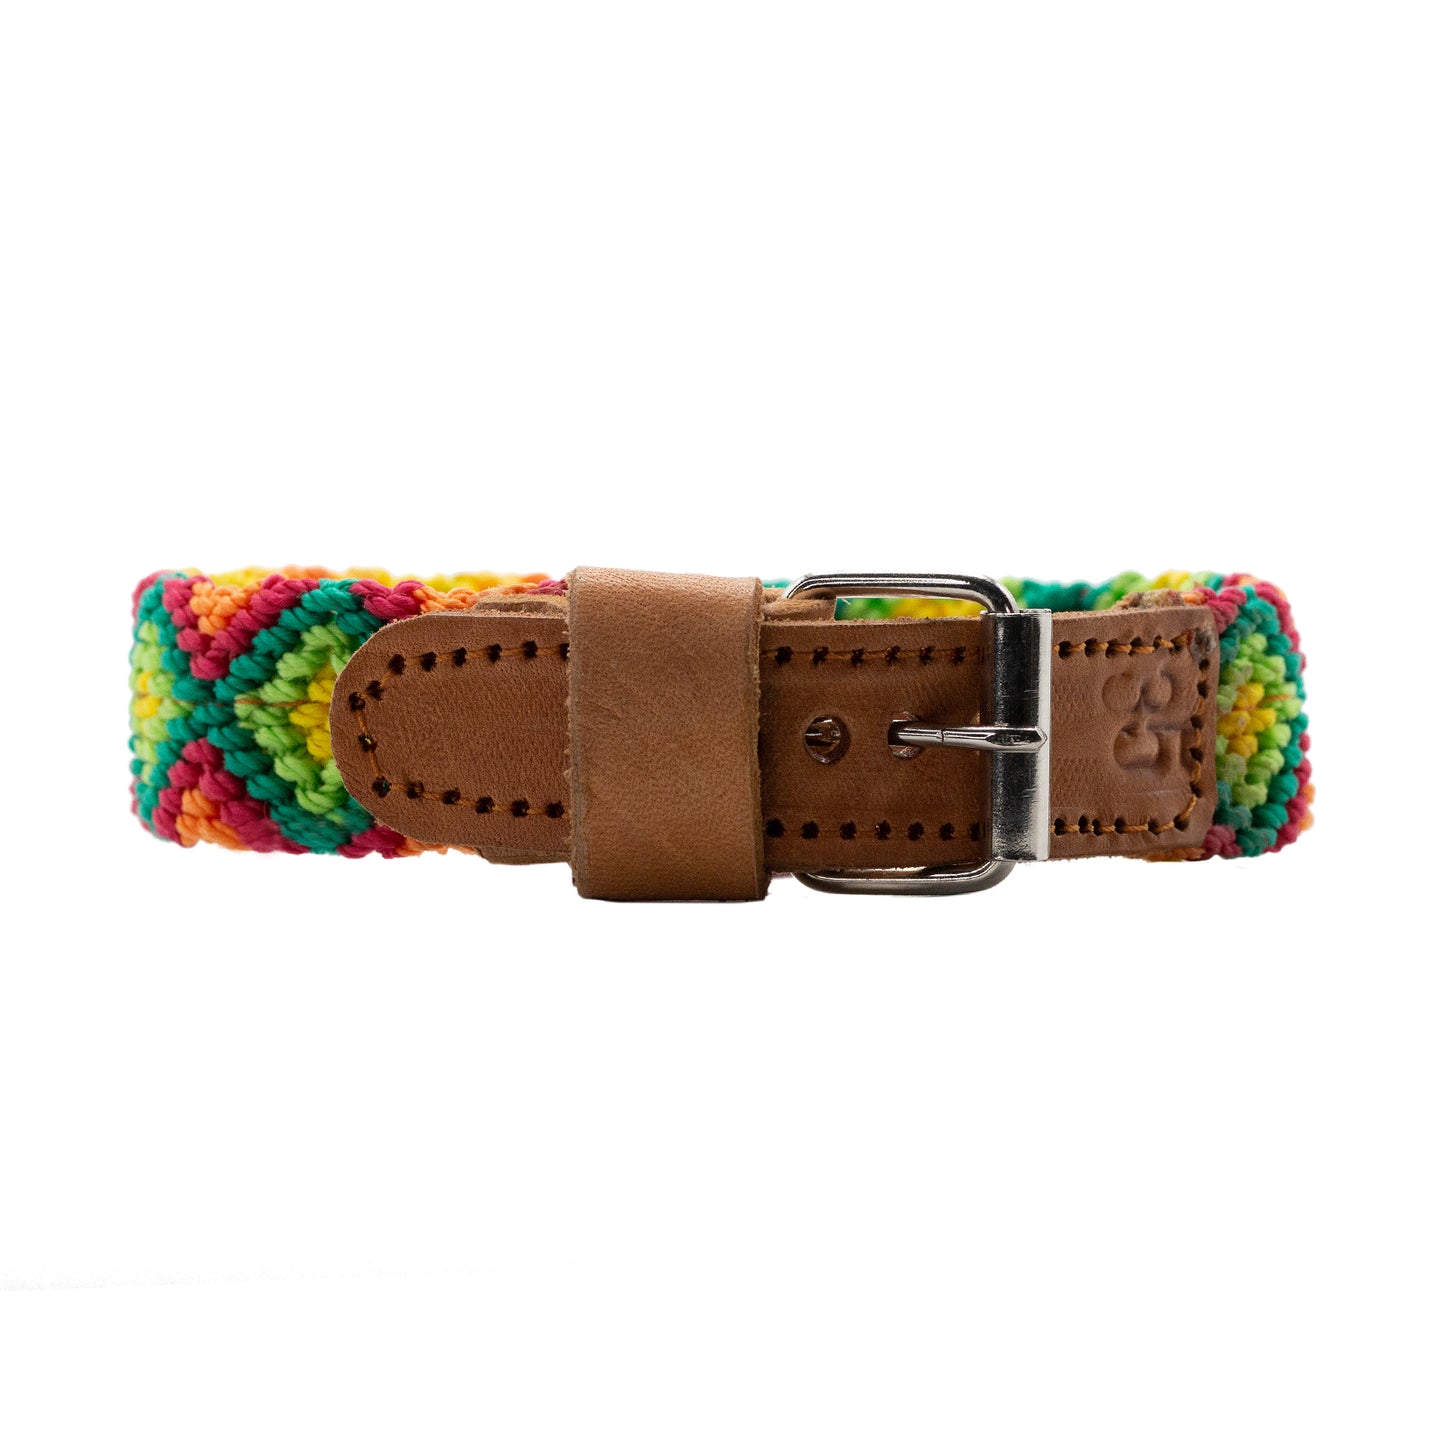 Dog collar woven meticulously by skilled craftsmen